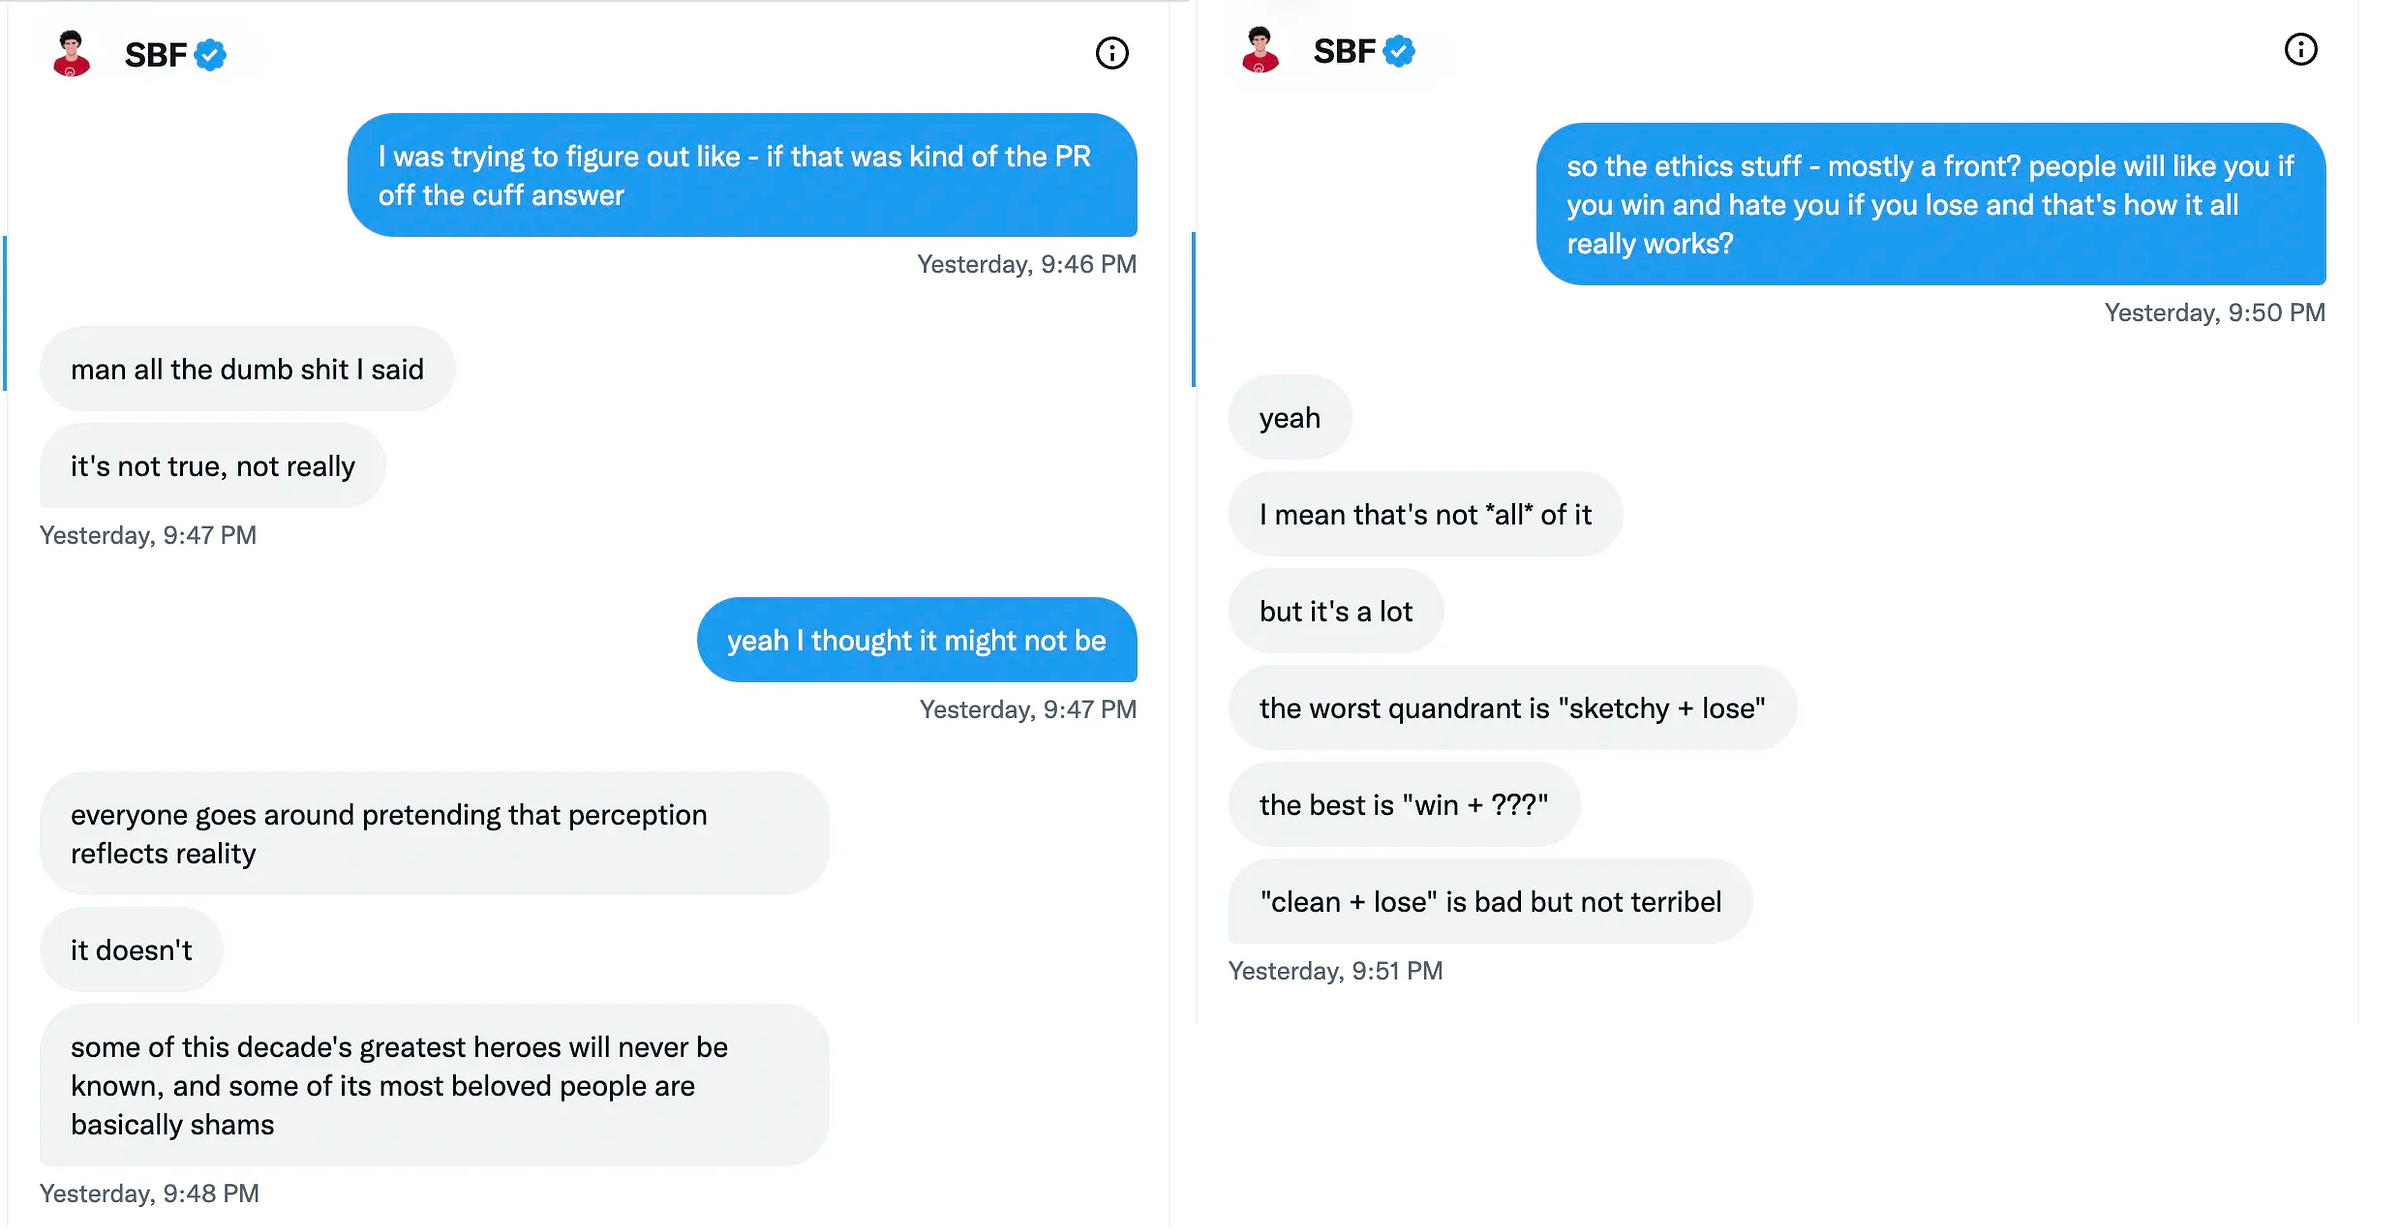 Two screenshots of Twitter DMs, side by side: Kelsey Piper: I was trying to figure out like - if that was kind of the PR off the cuff answer Sam Bankman-Fried: man all the dumb shit I said it’s not true, not really Kelsey Piper: yeah I thought it might not be Sam Bankman-Fried: everyone goes around pretending that perception reflects reality. it doesn’t. some of this decade’s greatest heroes will never be known, and some of its most beloved people are basically shams.   Kelsey Piper: so the ethics stuff - mostly a front? people will like you if you win and hate you if you lose and that’s how it all really works? Sam Bankman-Fried: yeah. I mean that’s not *all* of it. but it’s a lot. the worst quandrant is “sketchy + lose.” the best is “win + ???.” “clean + lose” is bad but not terribel